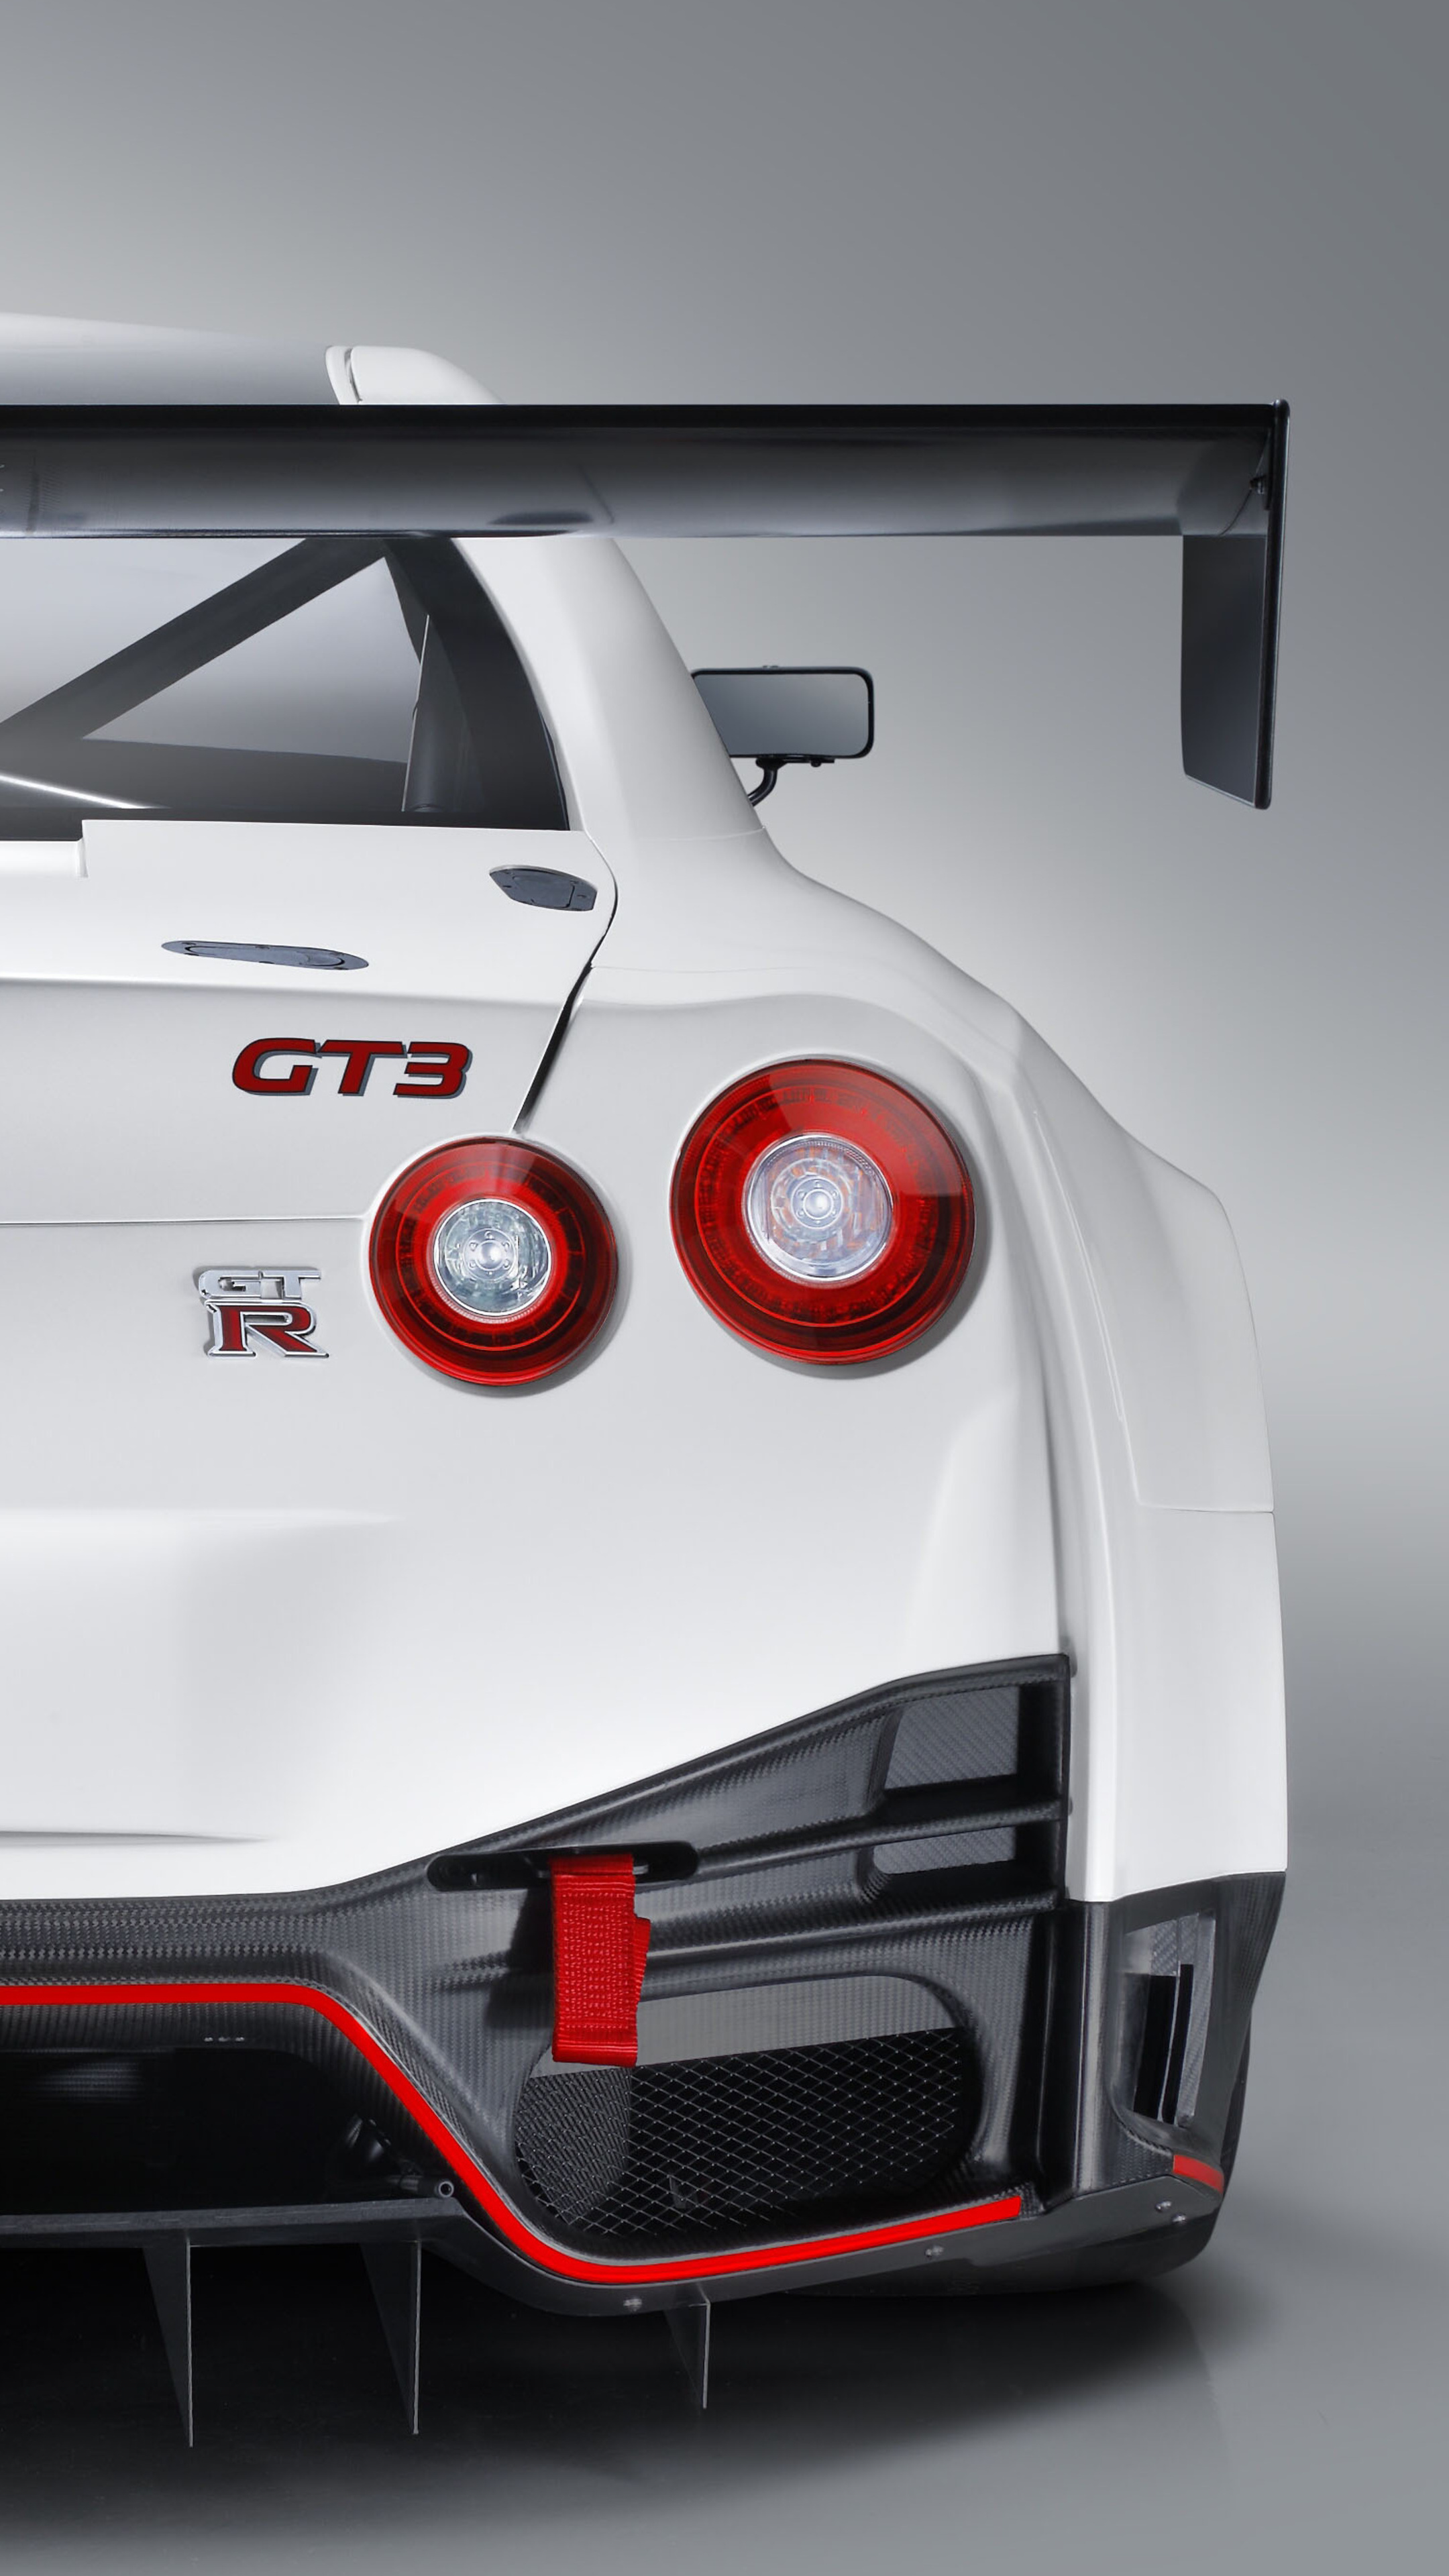 Nissan GT-R Nismo, GT3 racing, Xperia wallpapers, 4k images, 2160x3840 4K Phone